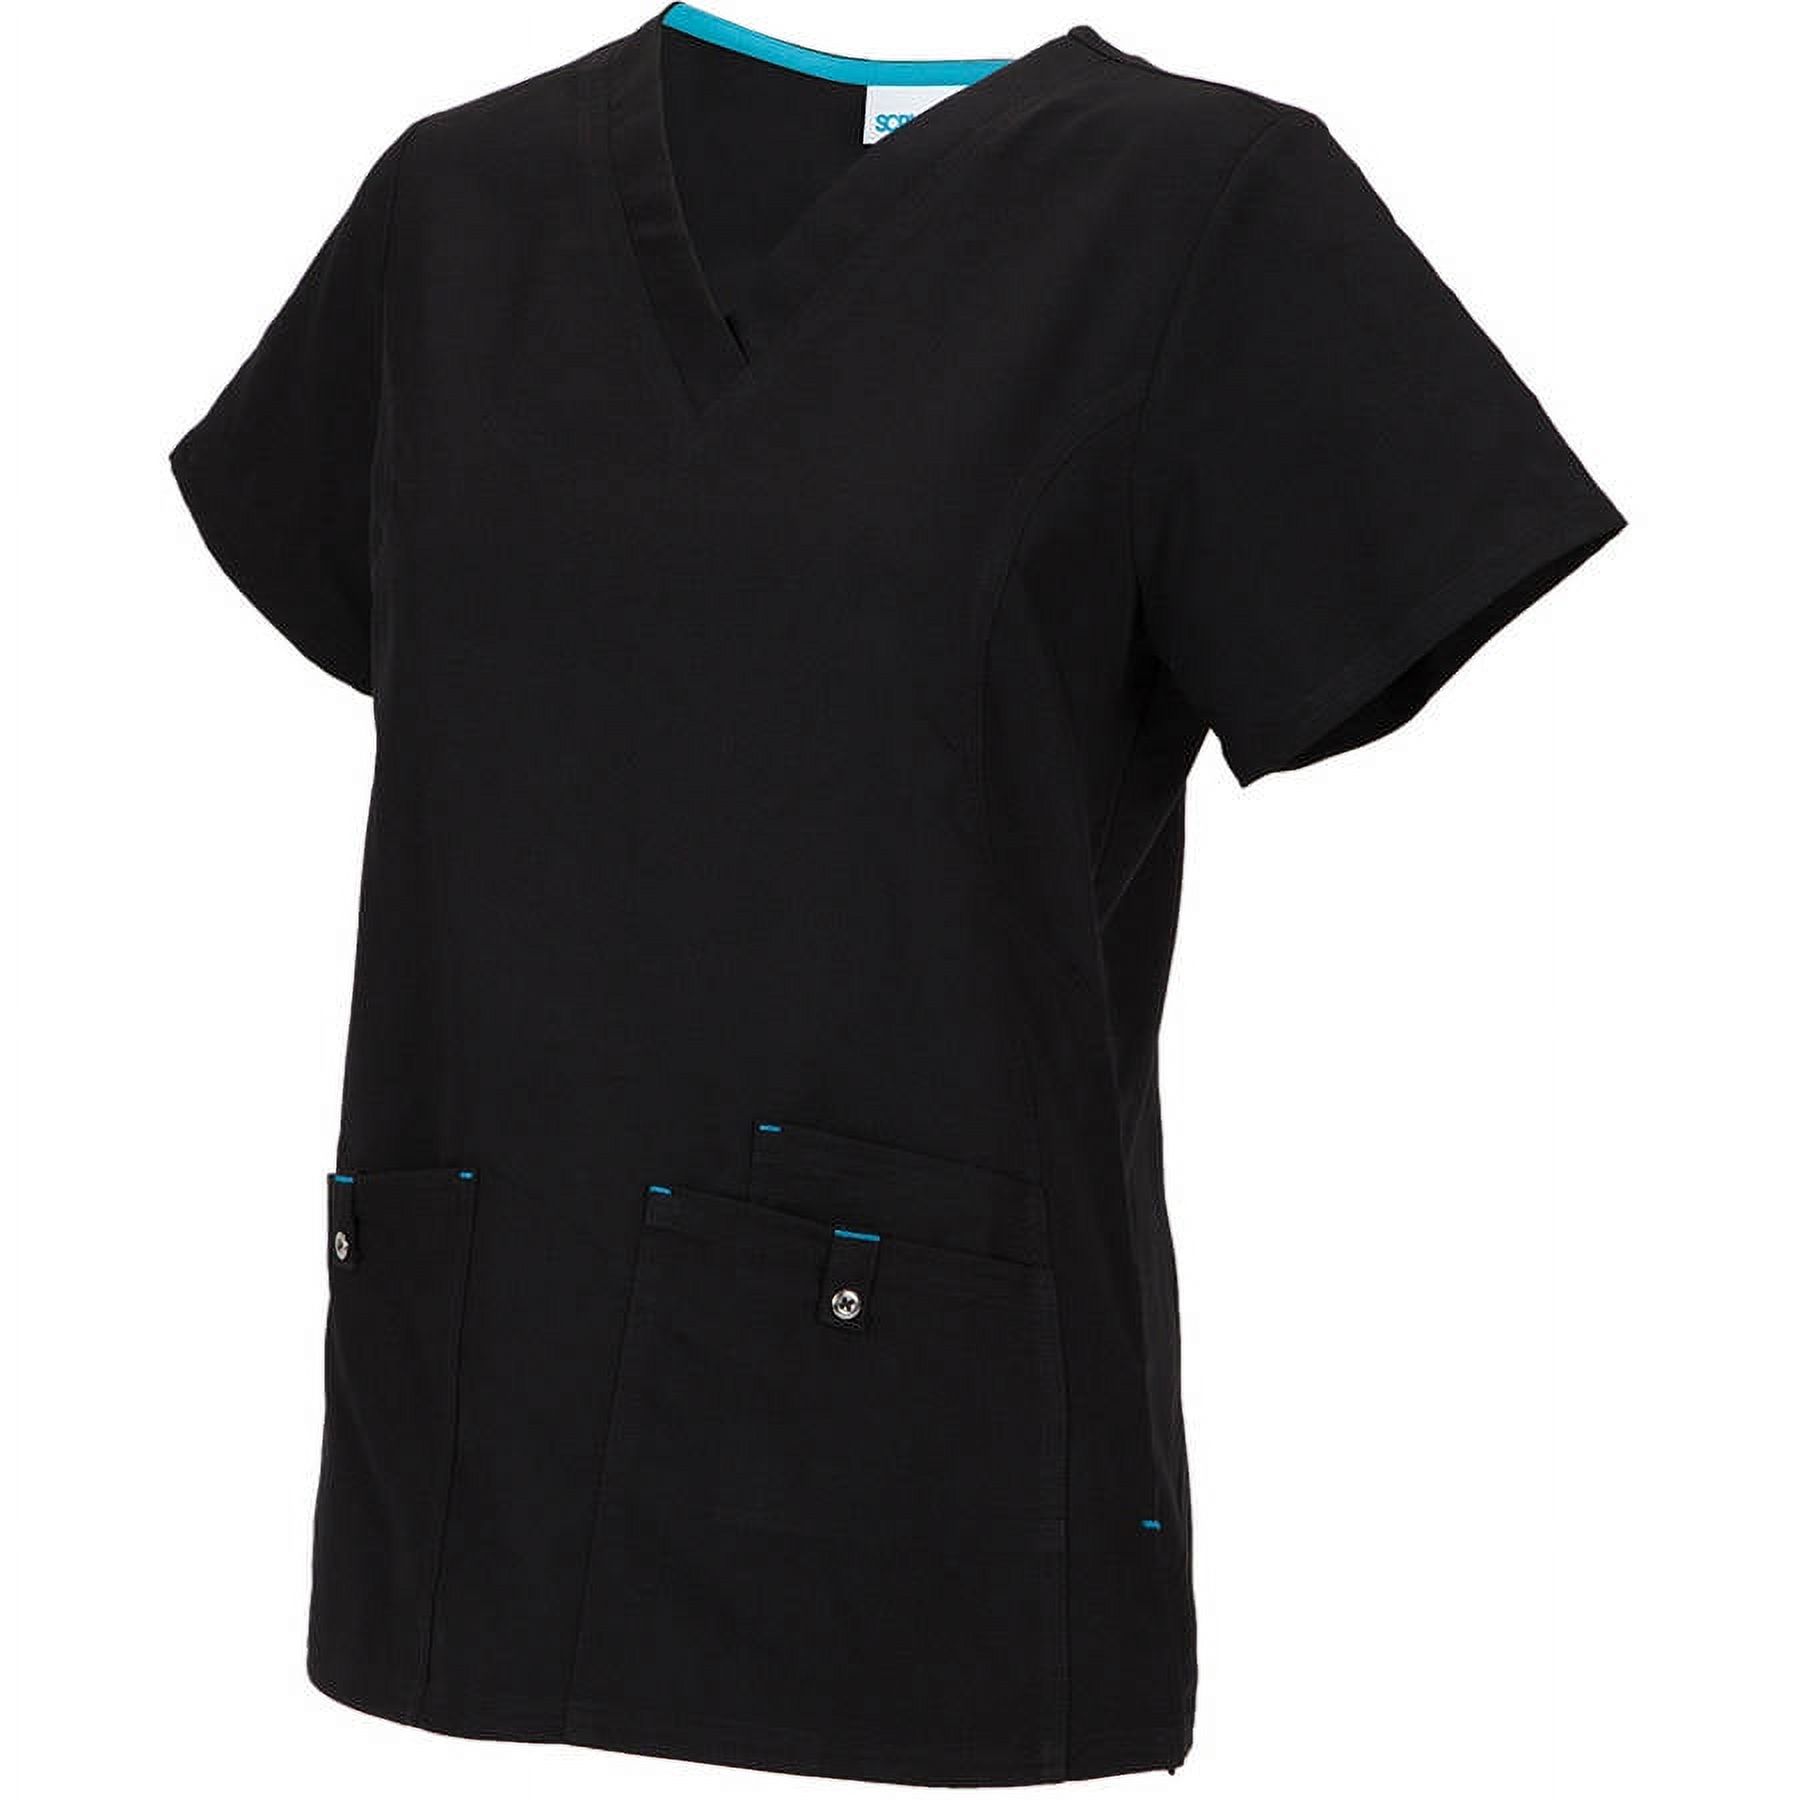 Women's Premium Collection Stretch Rayon V-Neck Scrub Top - image 2 of 2